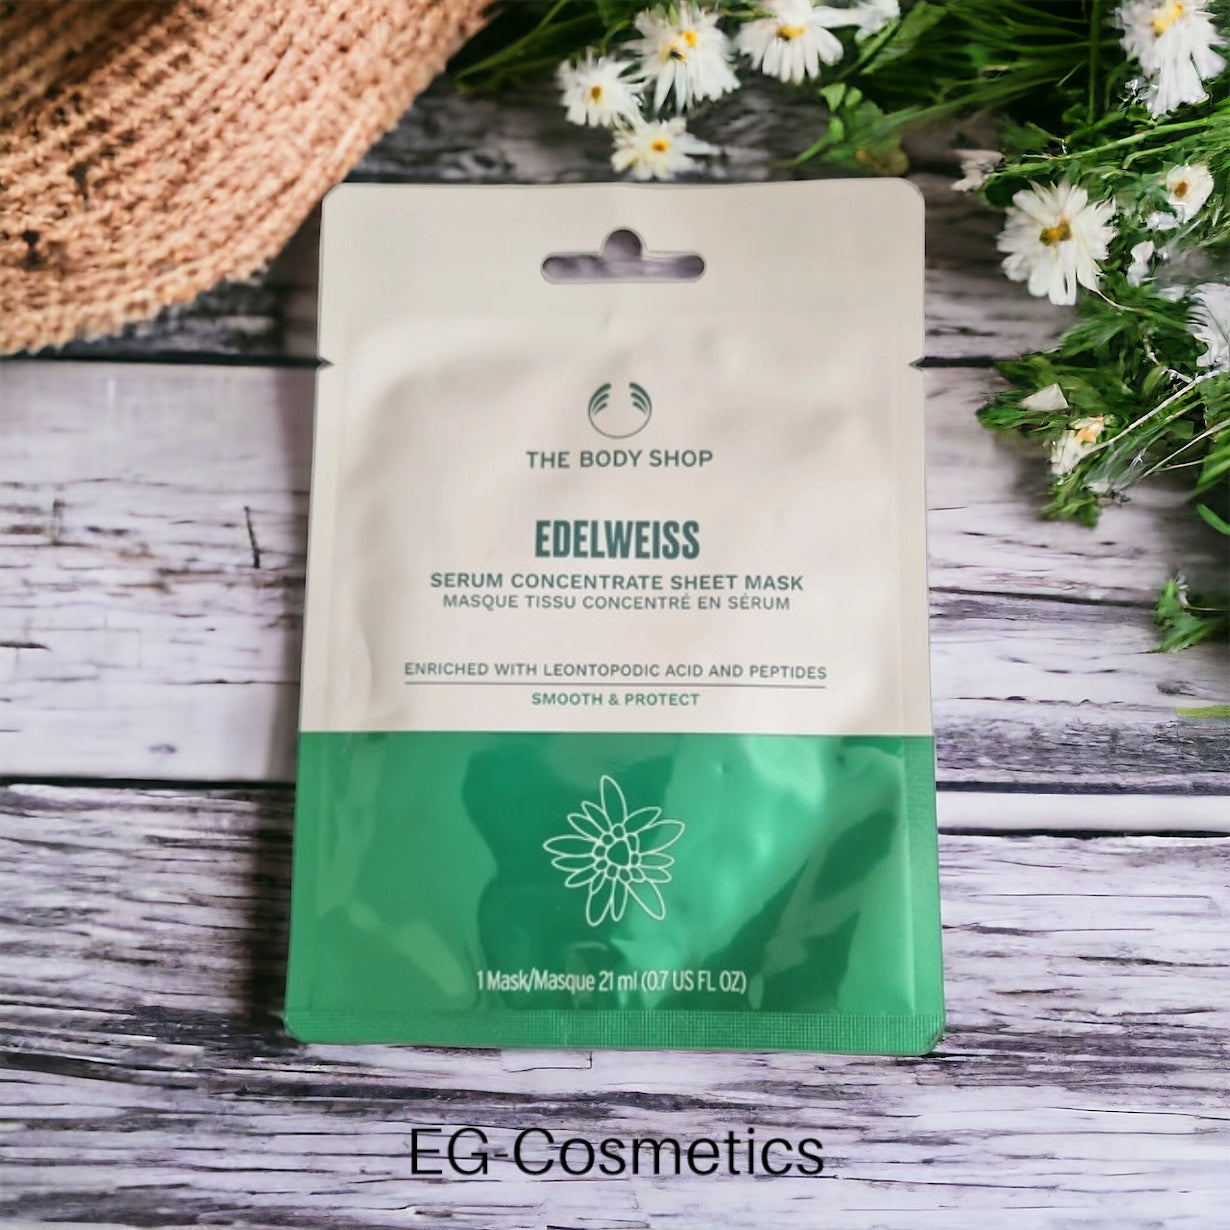 The Body Shop Edelweiss Serum Concentrate Sheet Mask 21ml